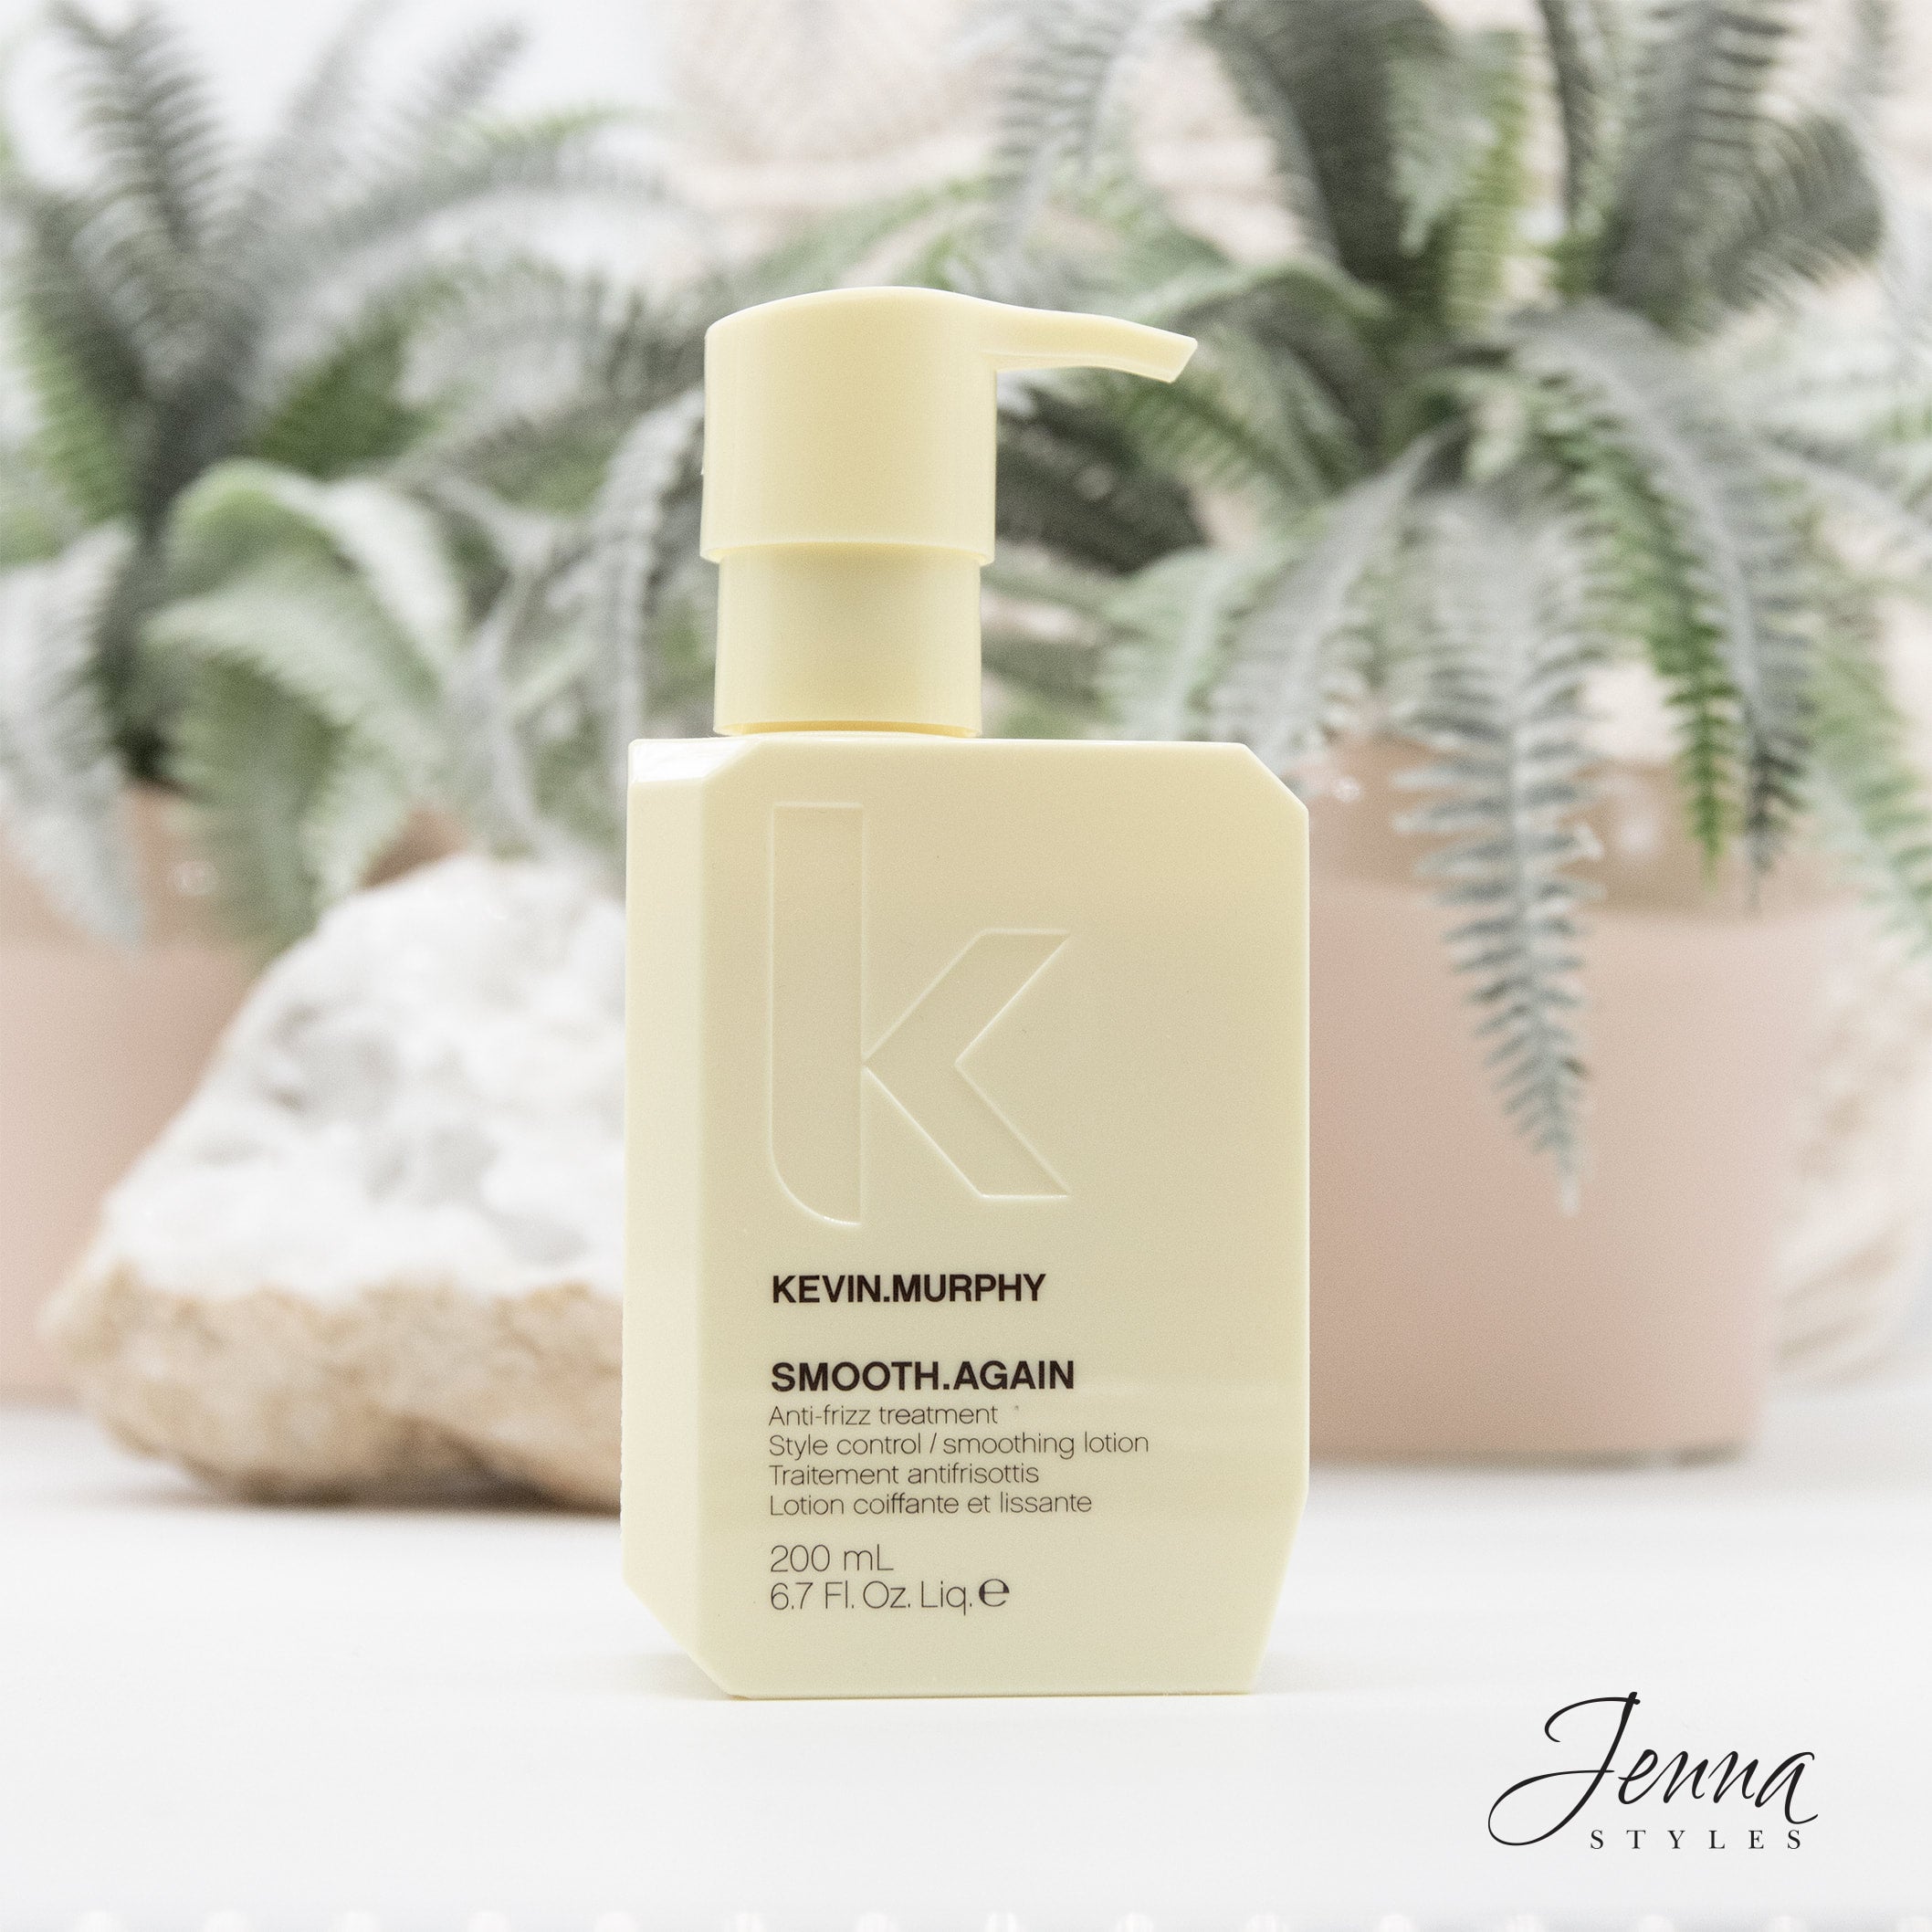 Smooth Again - Kevin Murphy Jenna Styles